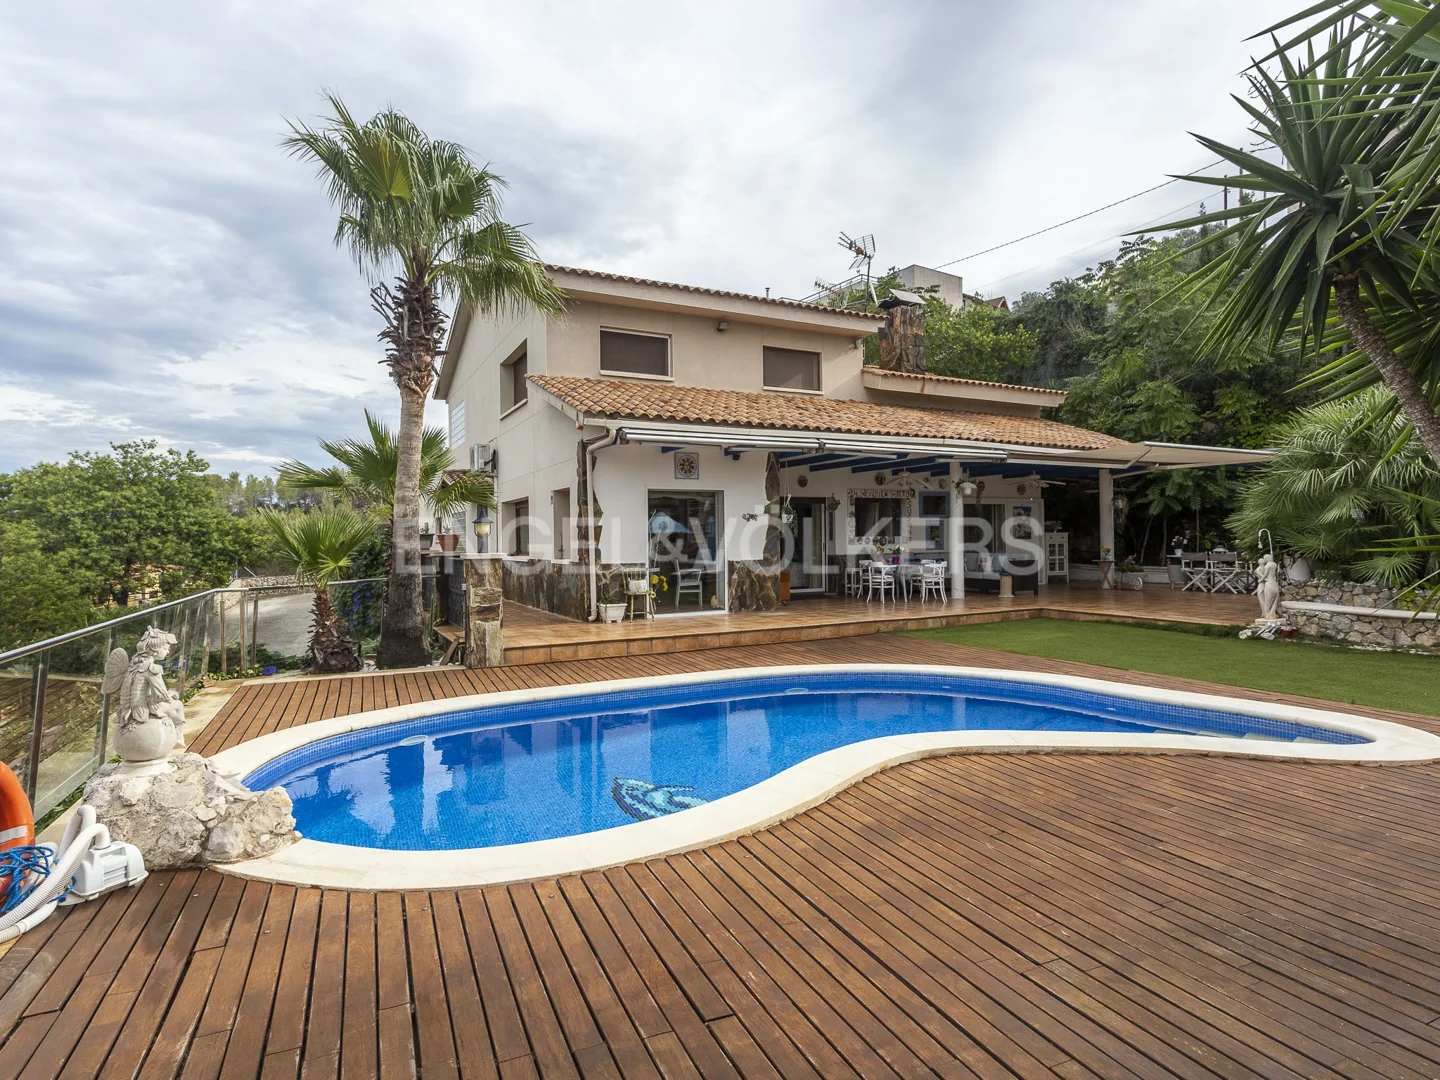 House with amazing views of Garraf park